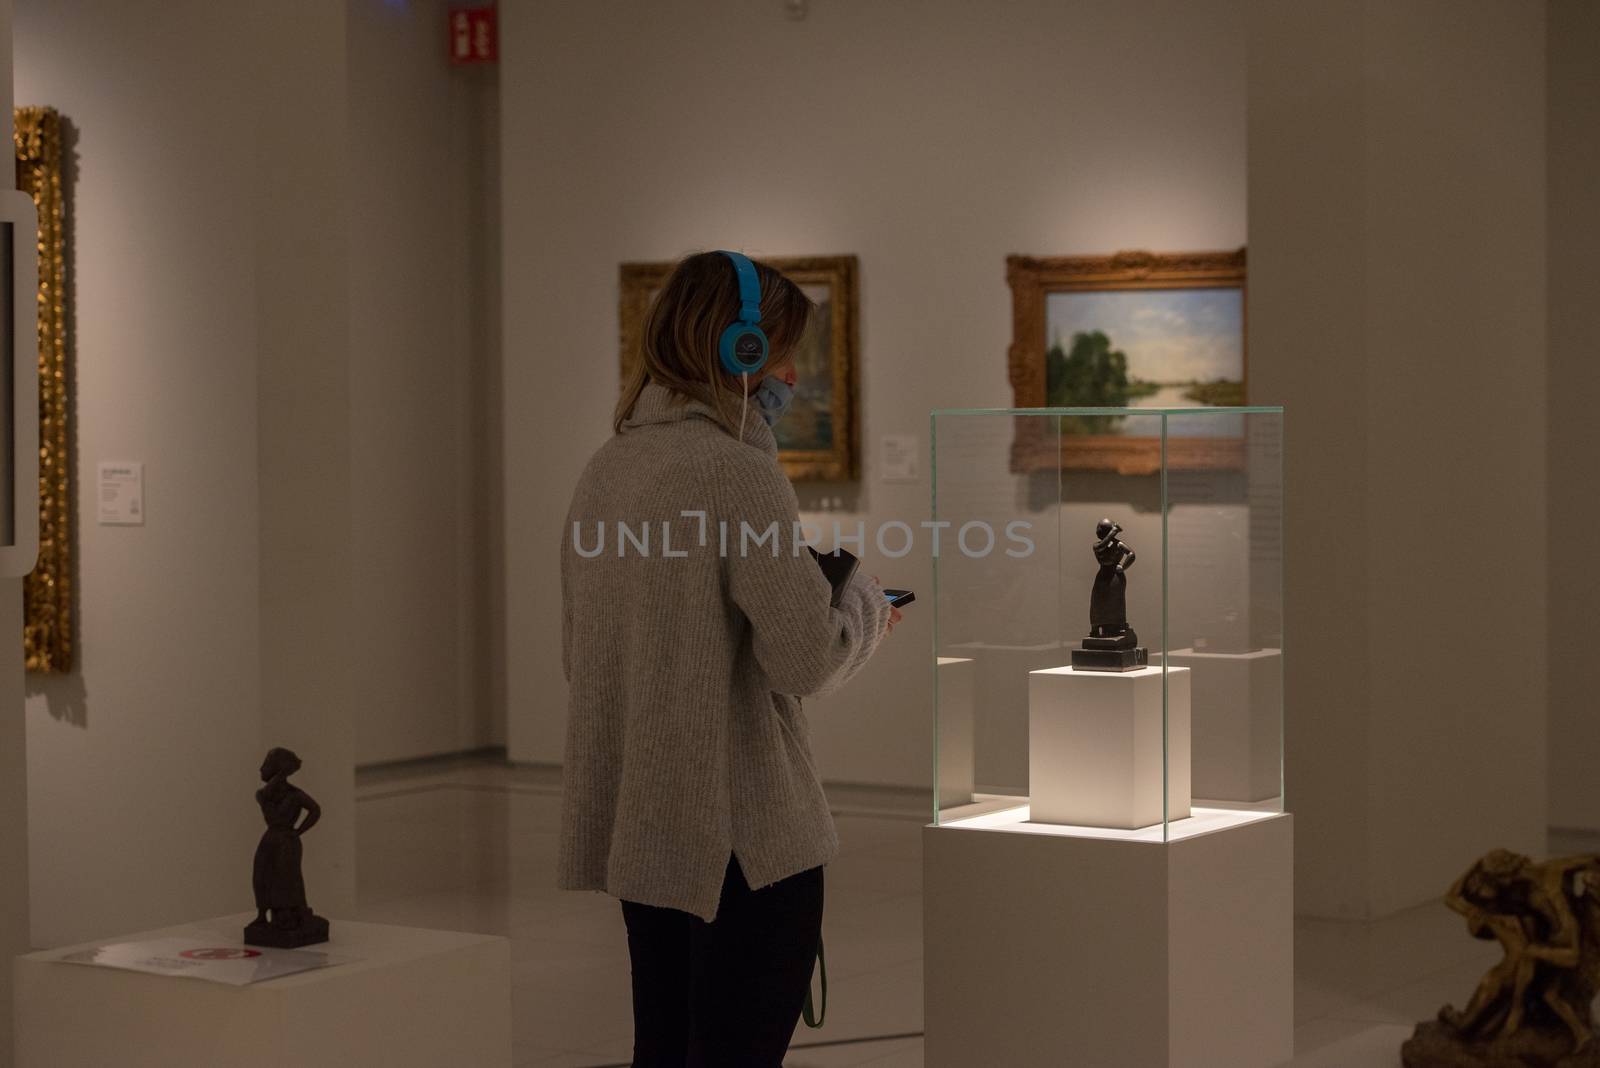 Escaldes - Engordany, Andorra - June 17 2020 : Visitors in the museum Carmen Thyssen. The museum remains to one of significant objects in Andorra on June 17 2020 in Andorra.